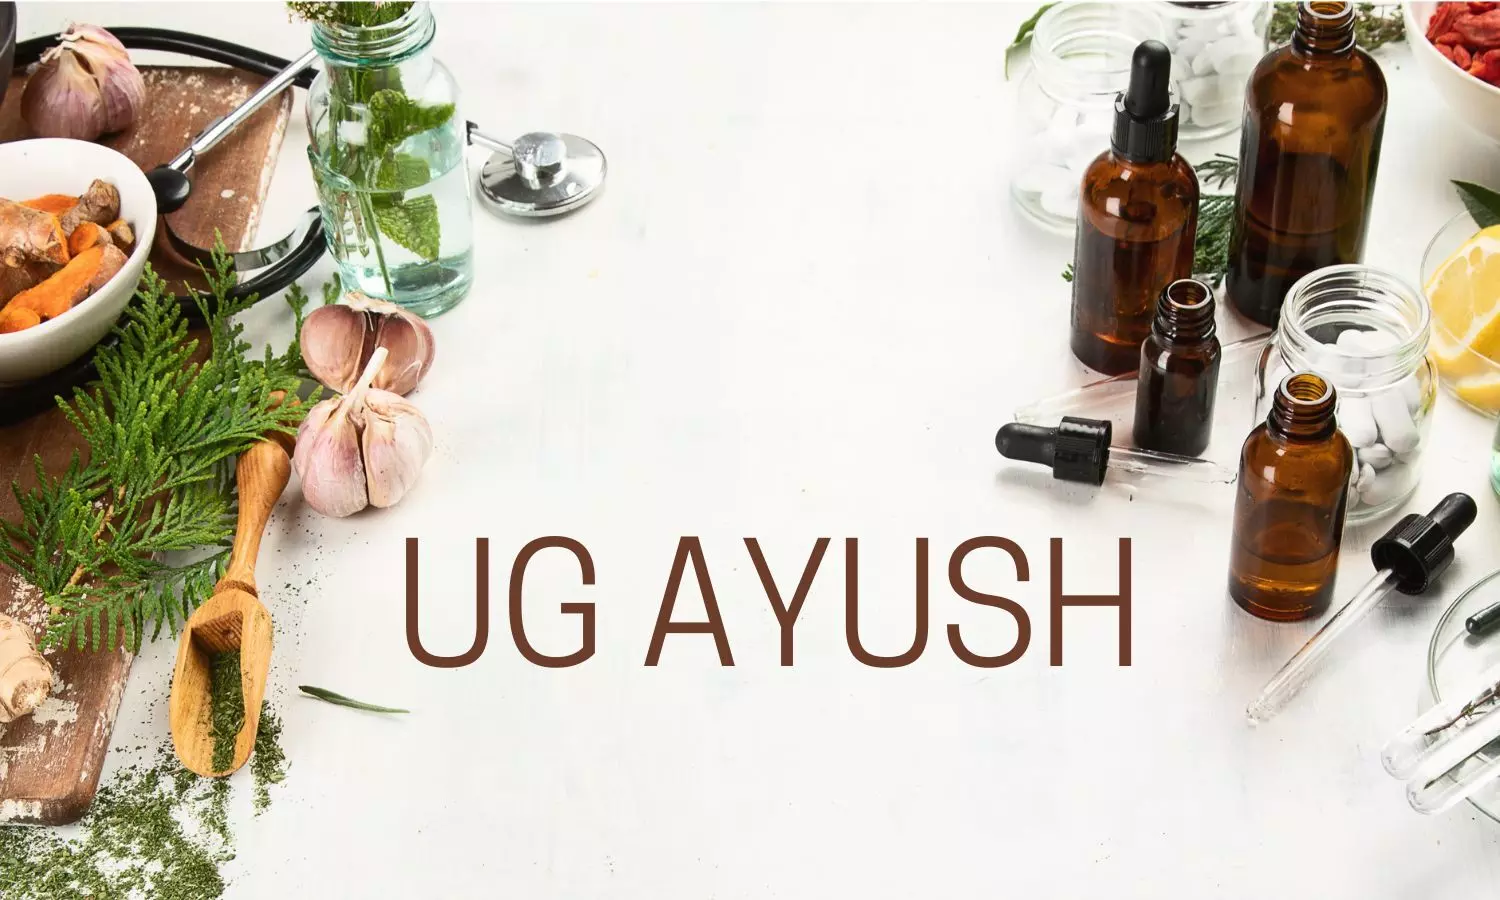 WBMCC begins Counselling UG AYUSH Admissions, details